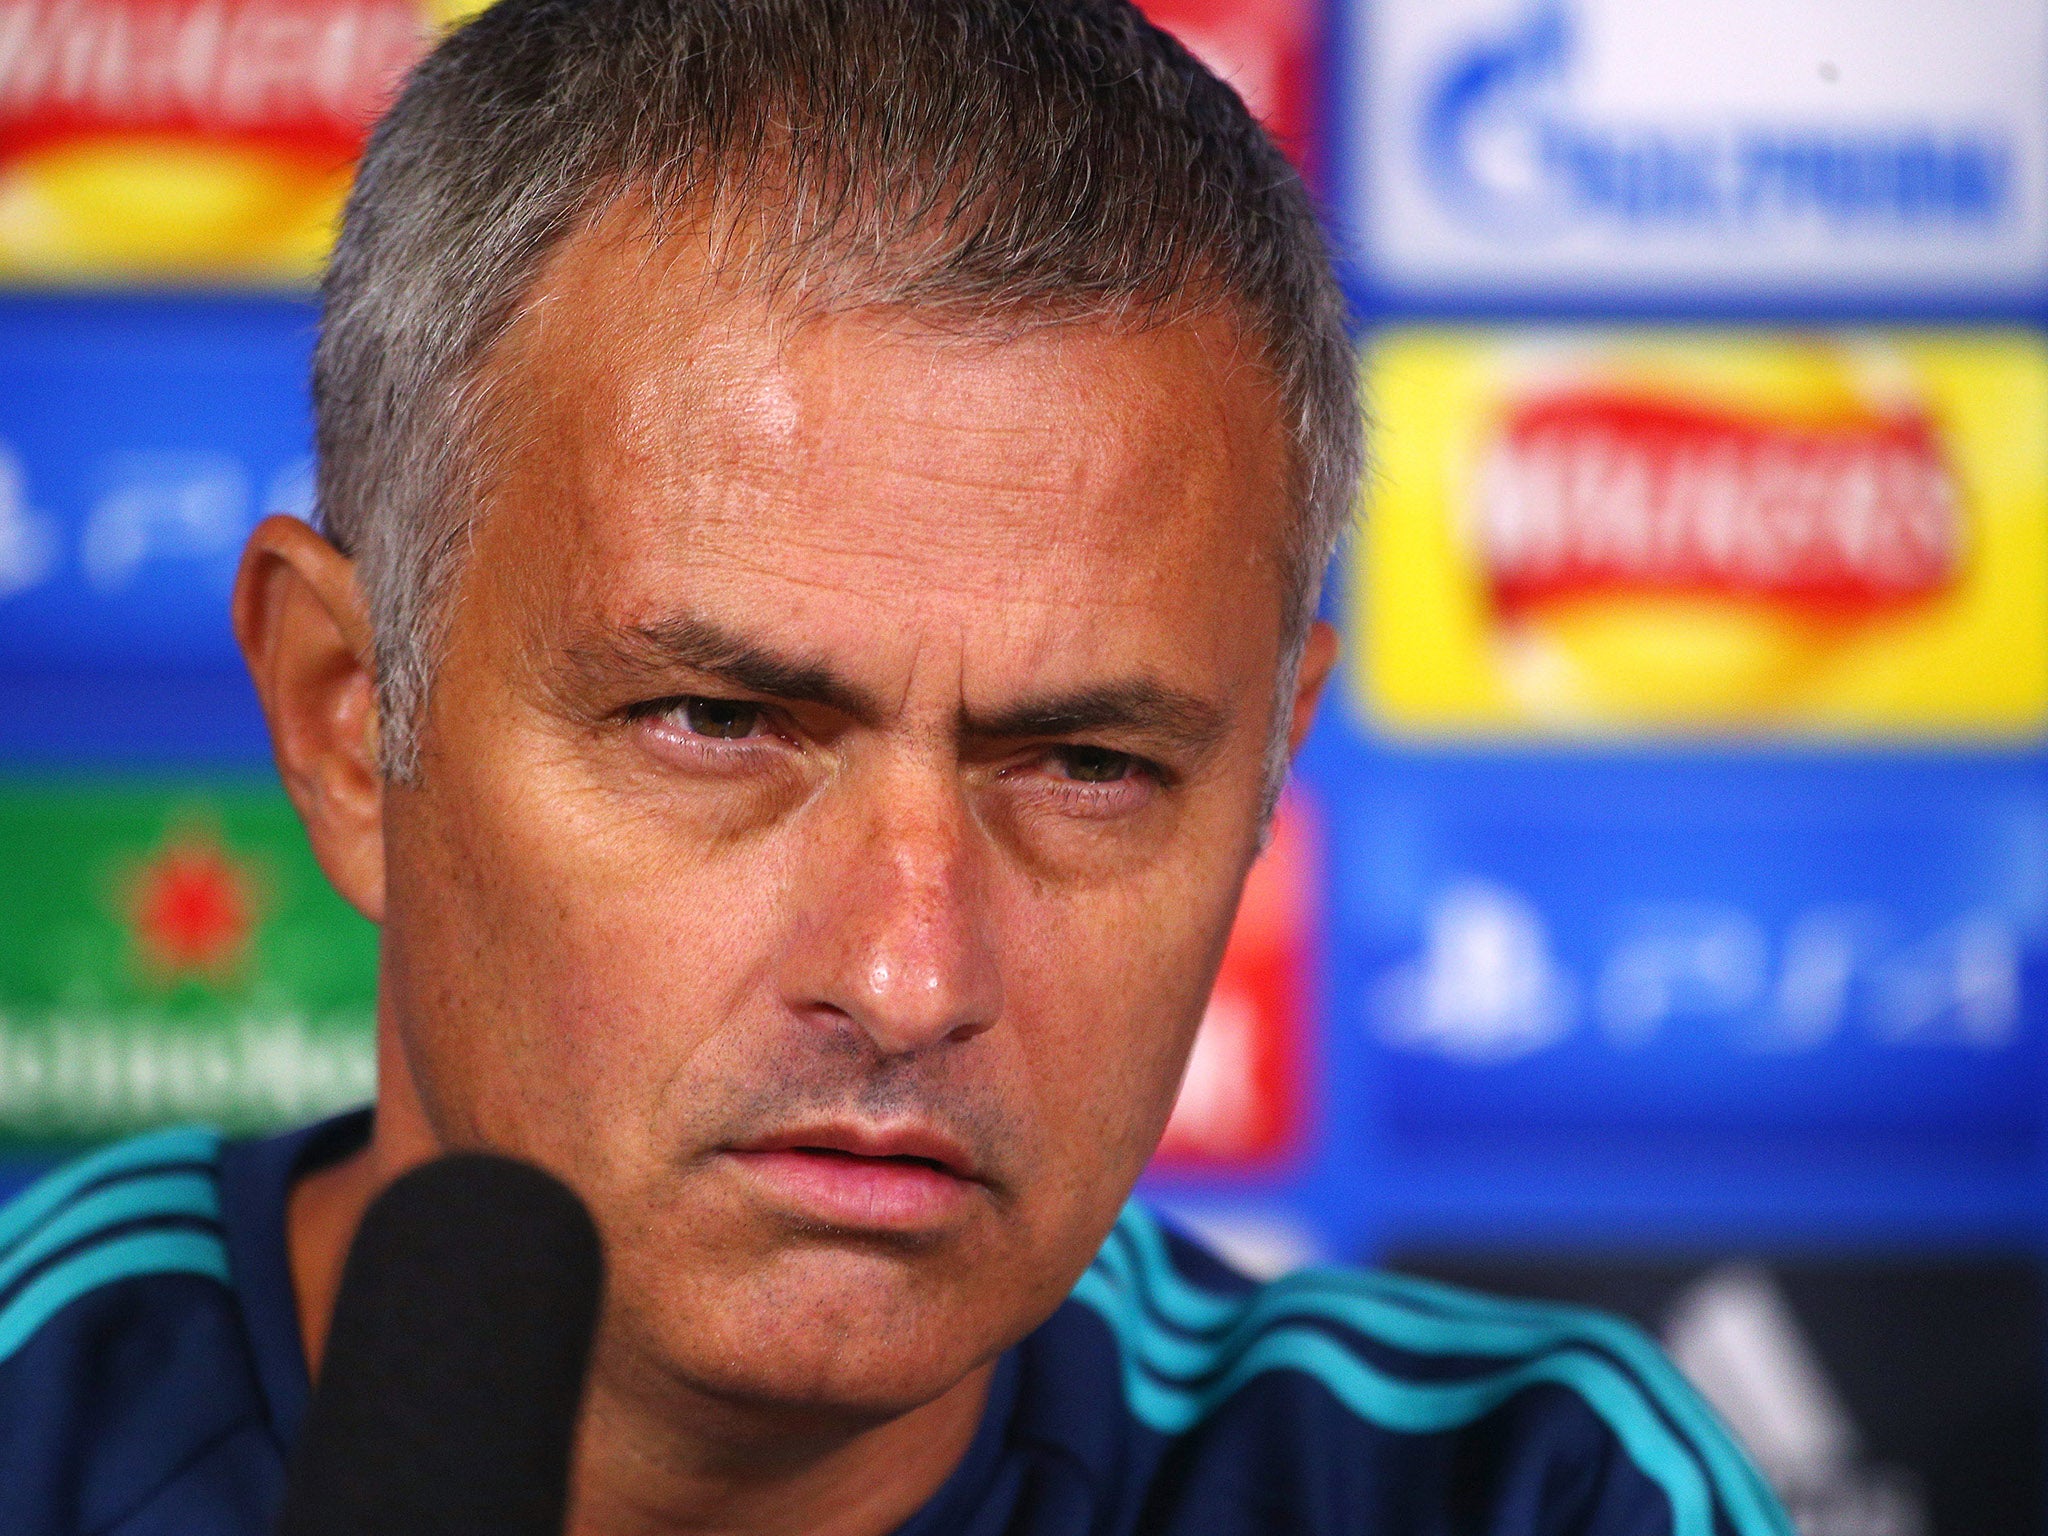 Jose Mourinho at Tuesday's press conference